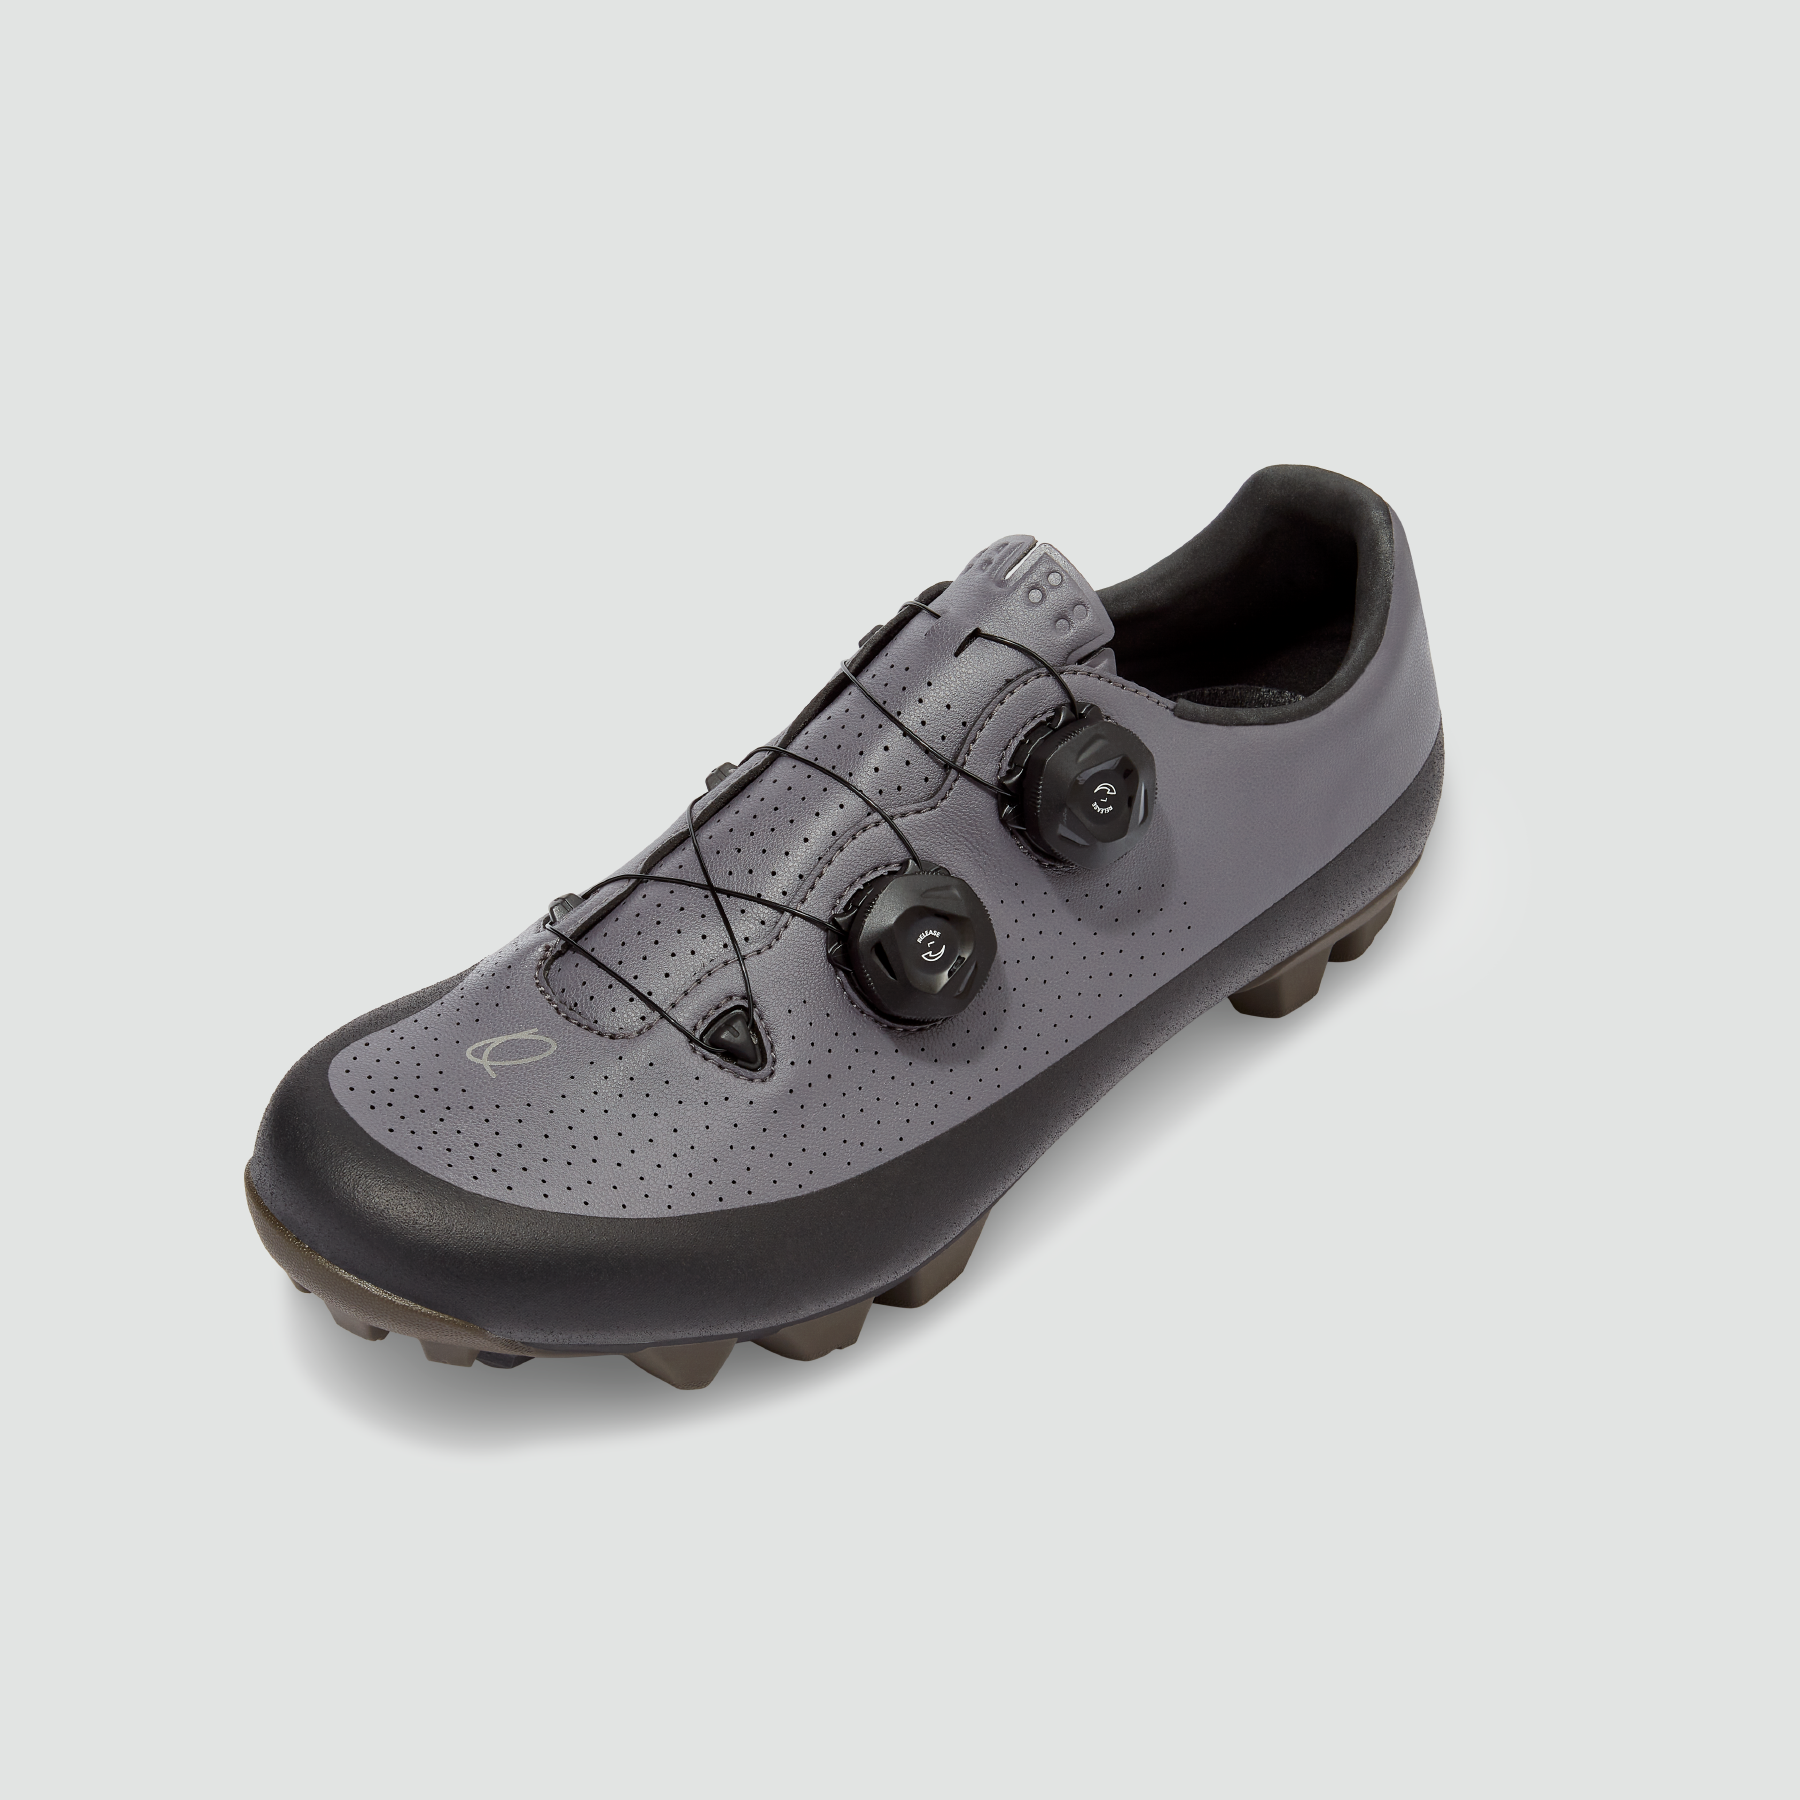 GT XC Shoes - Charcoal